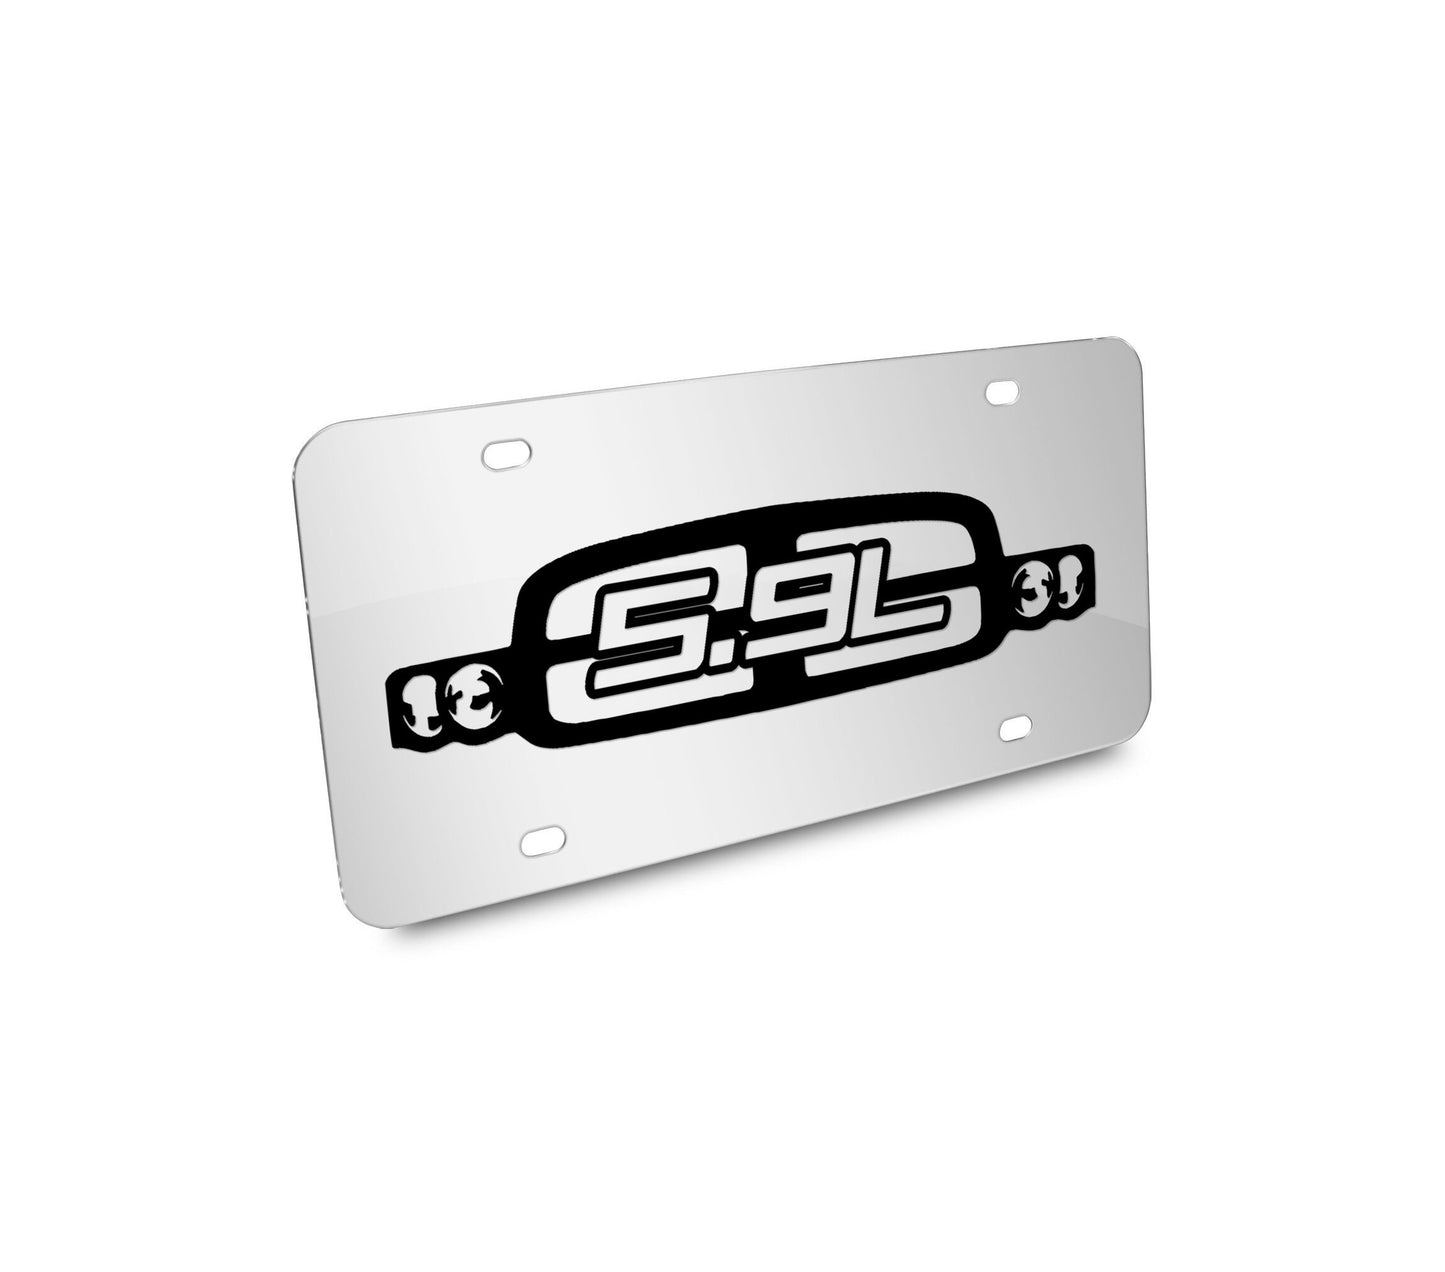 5.9L 3rd Gen Grille License Plate - Many Colors